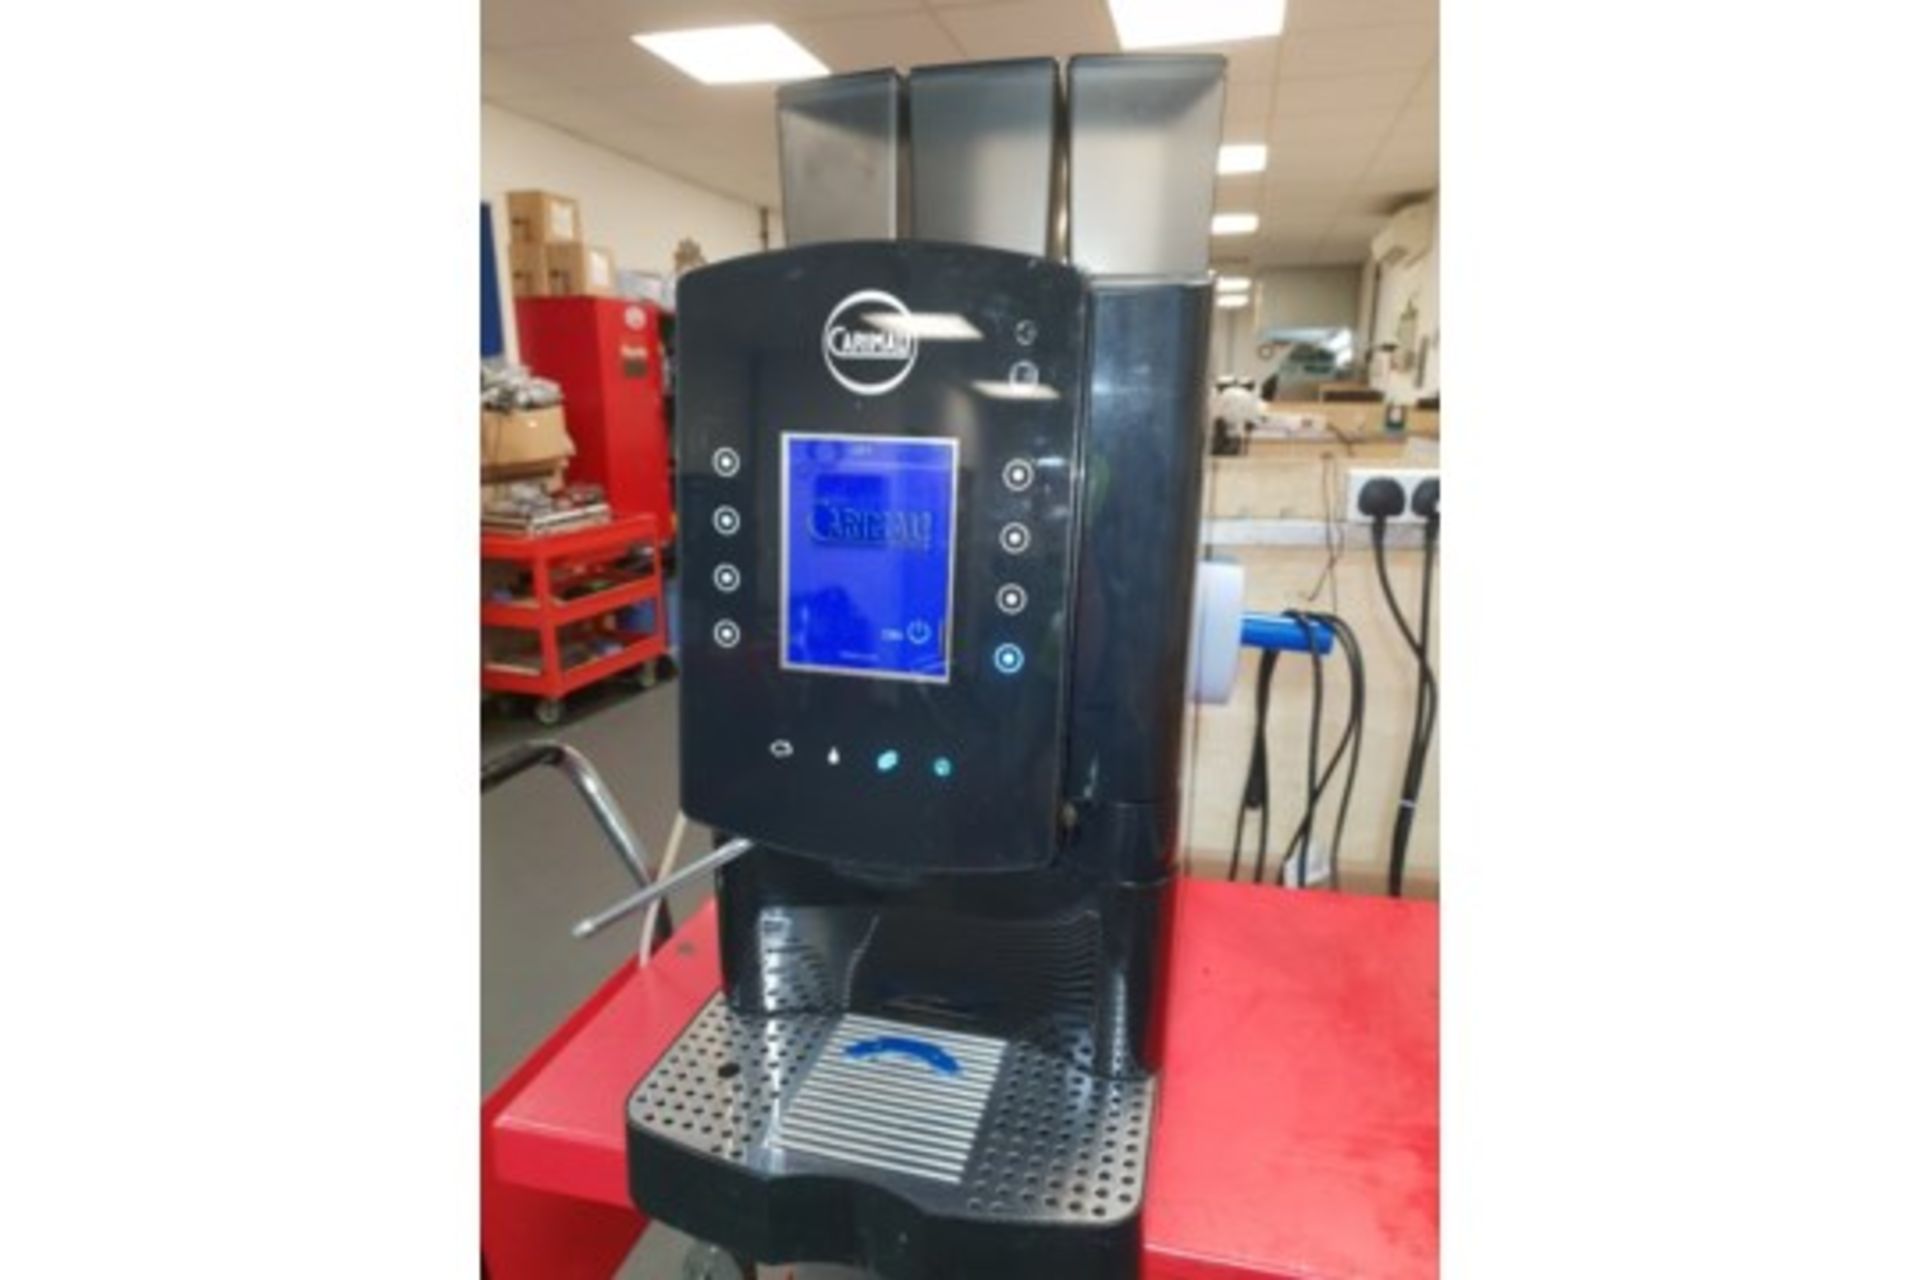 Carimali Solar Touch Drinks Machine – Bean to cup Coffee + Chocolate & Other Drinks